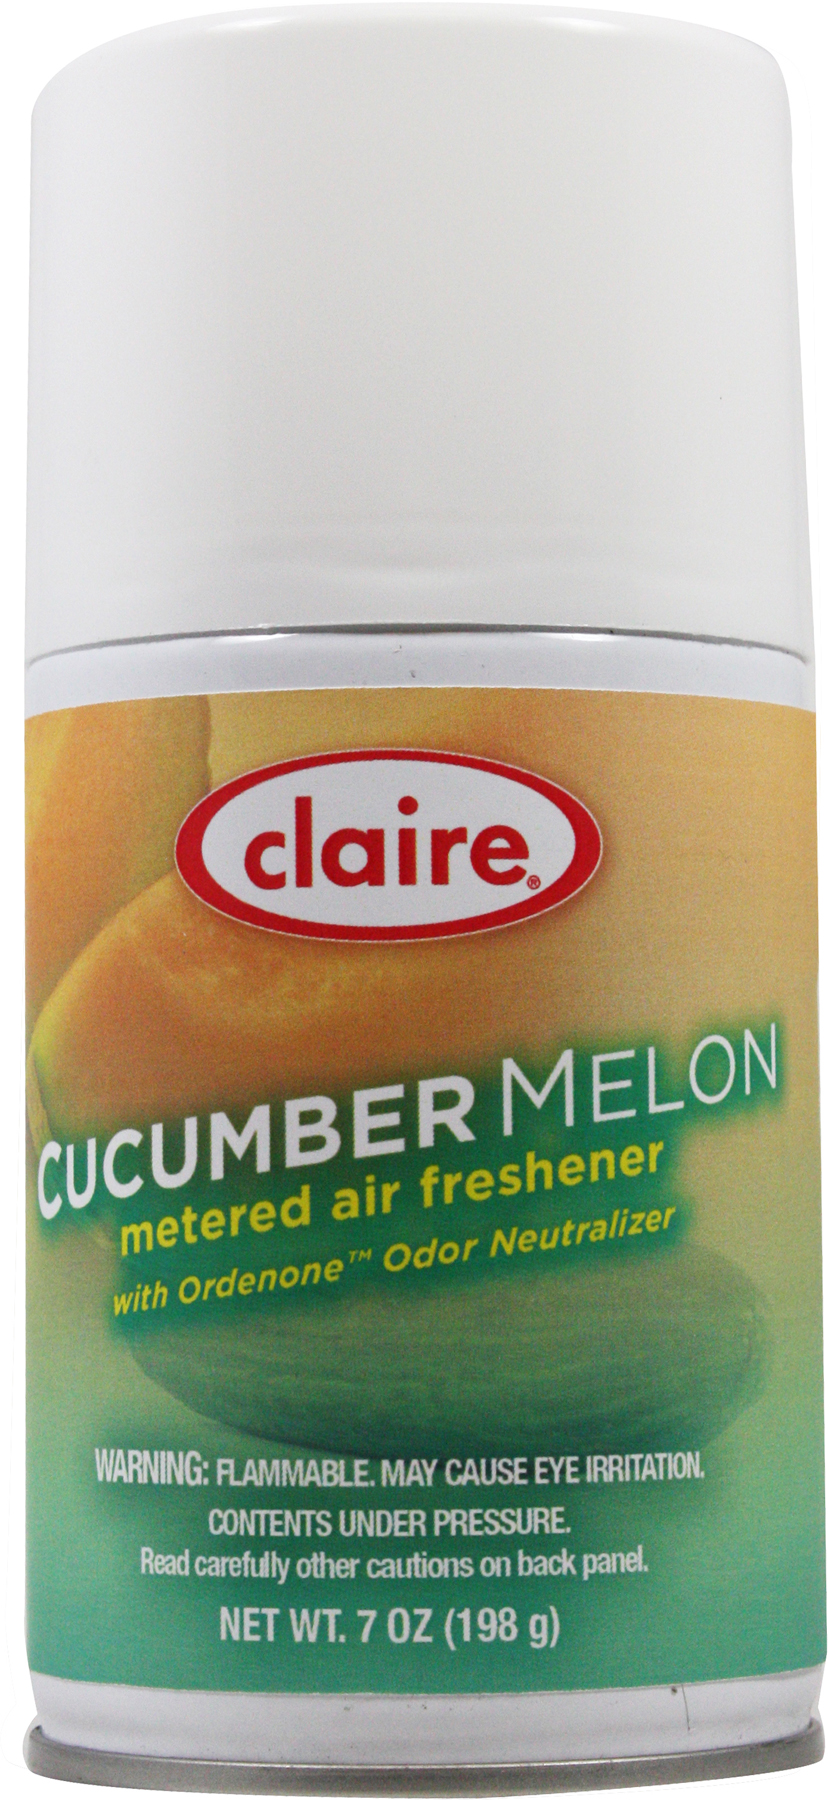 CLAIRE CUCUMBER MELON METERED REFILL (12/7OZ)